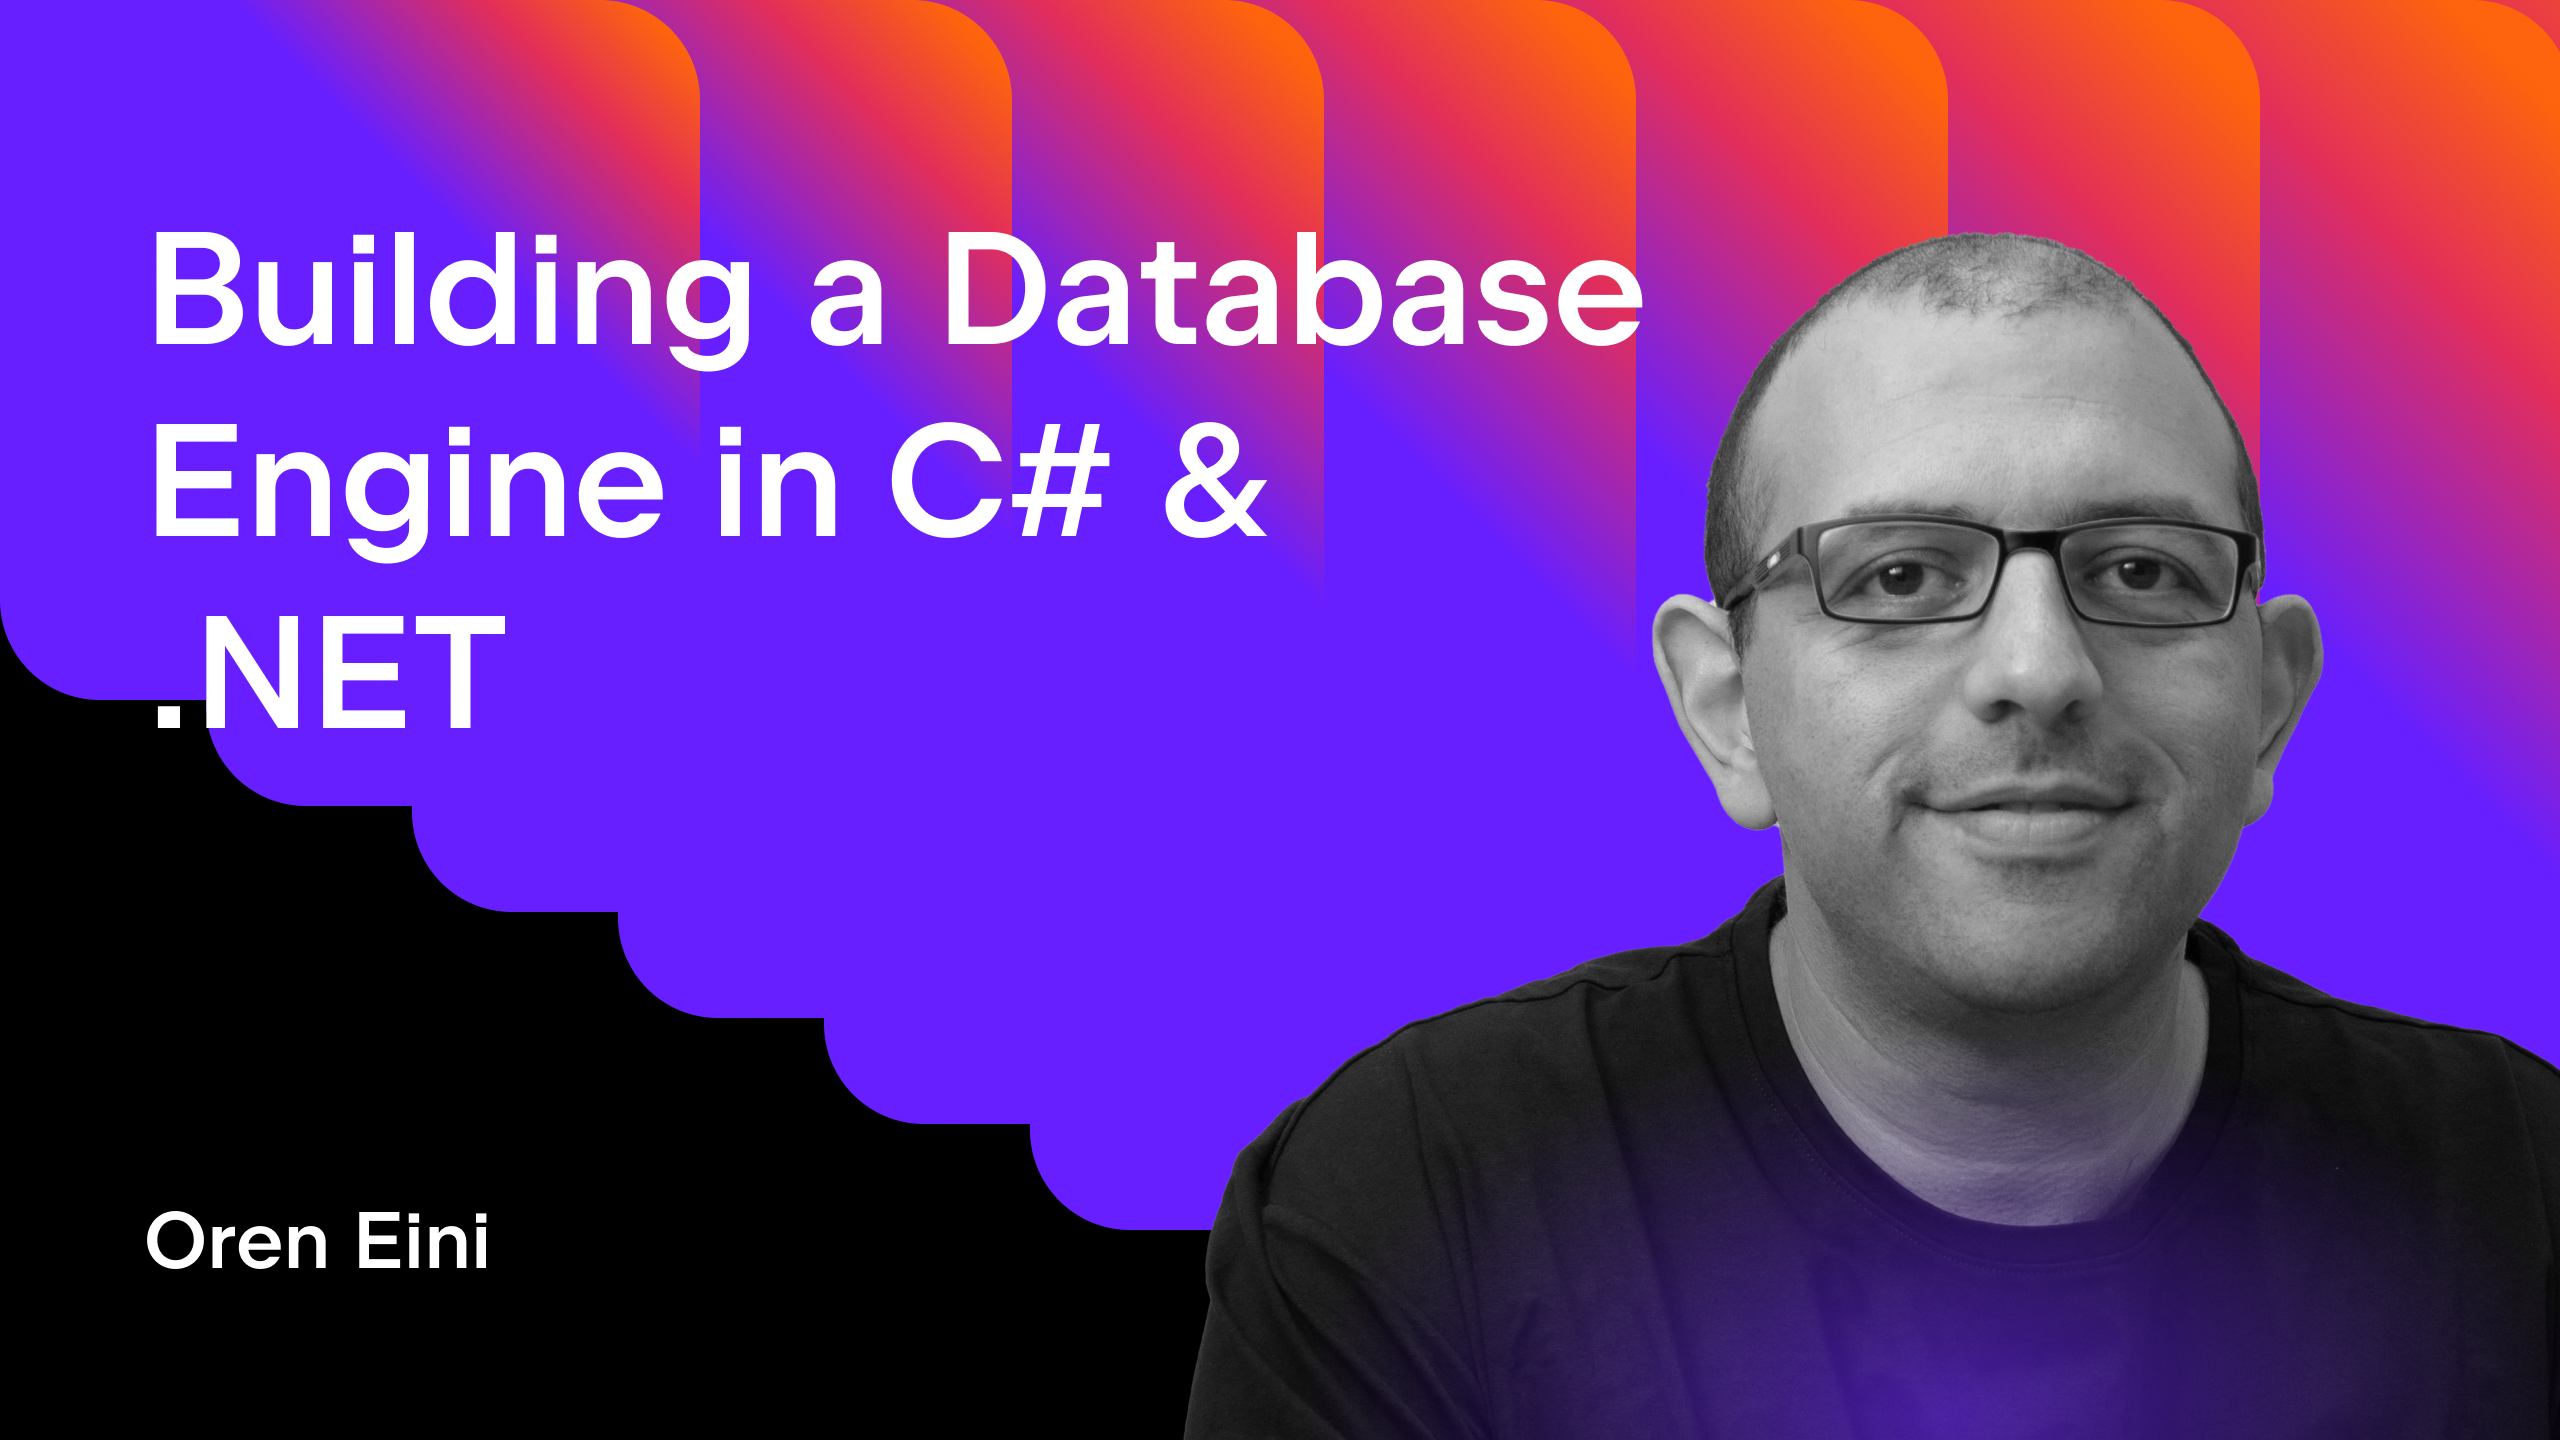 Building a Database Engine in C# & .NET with Oren Eini